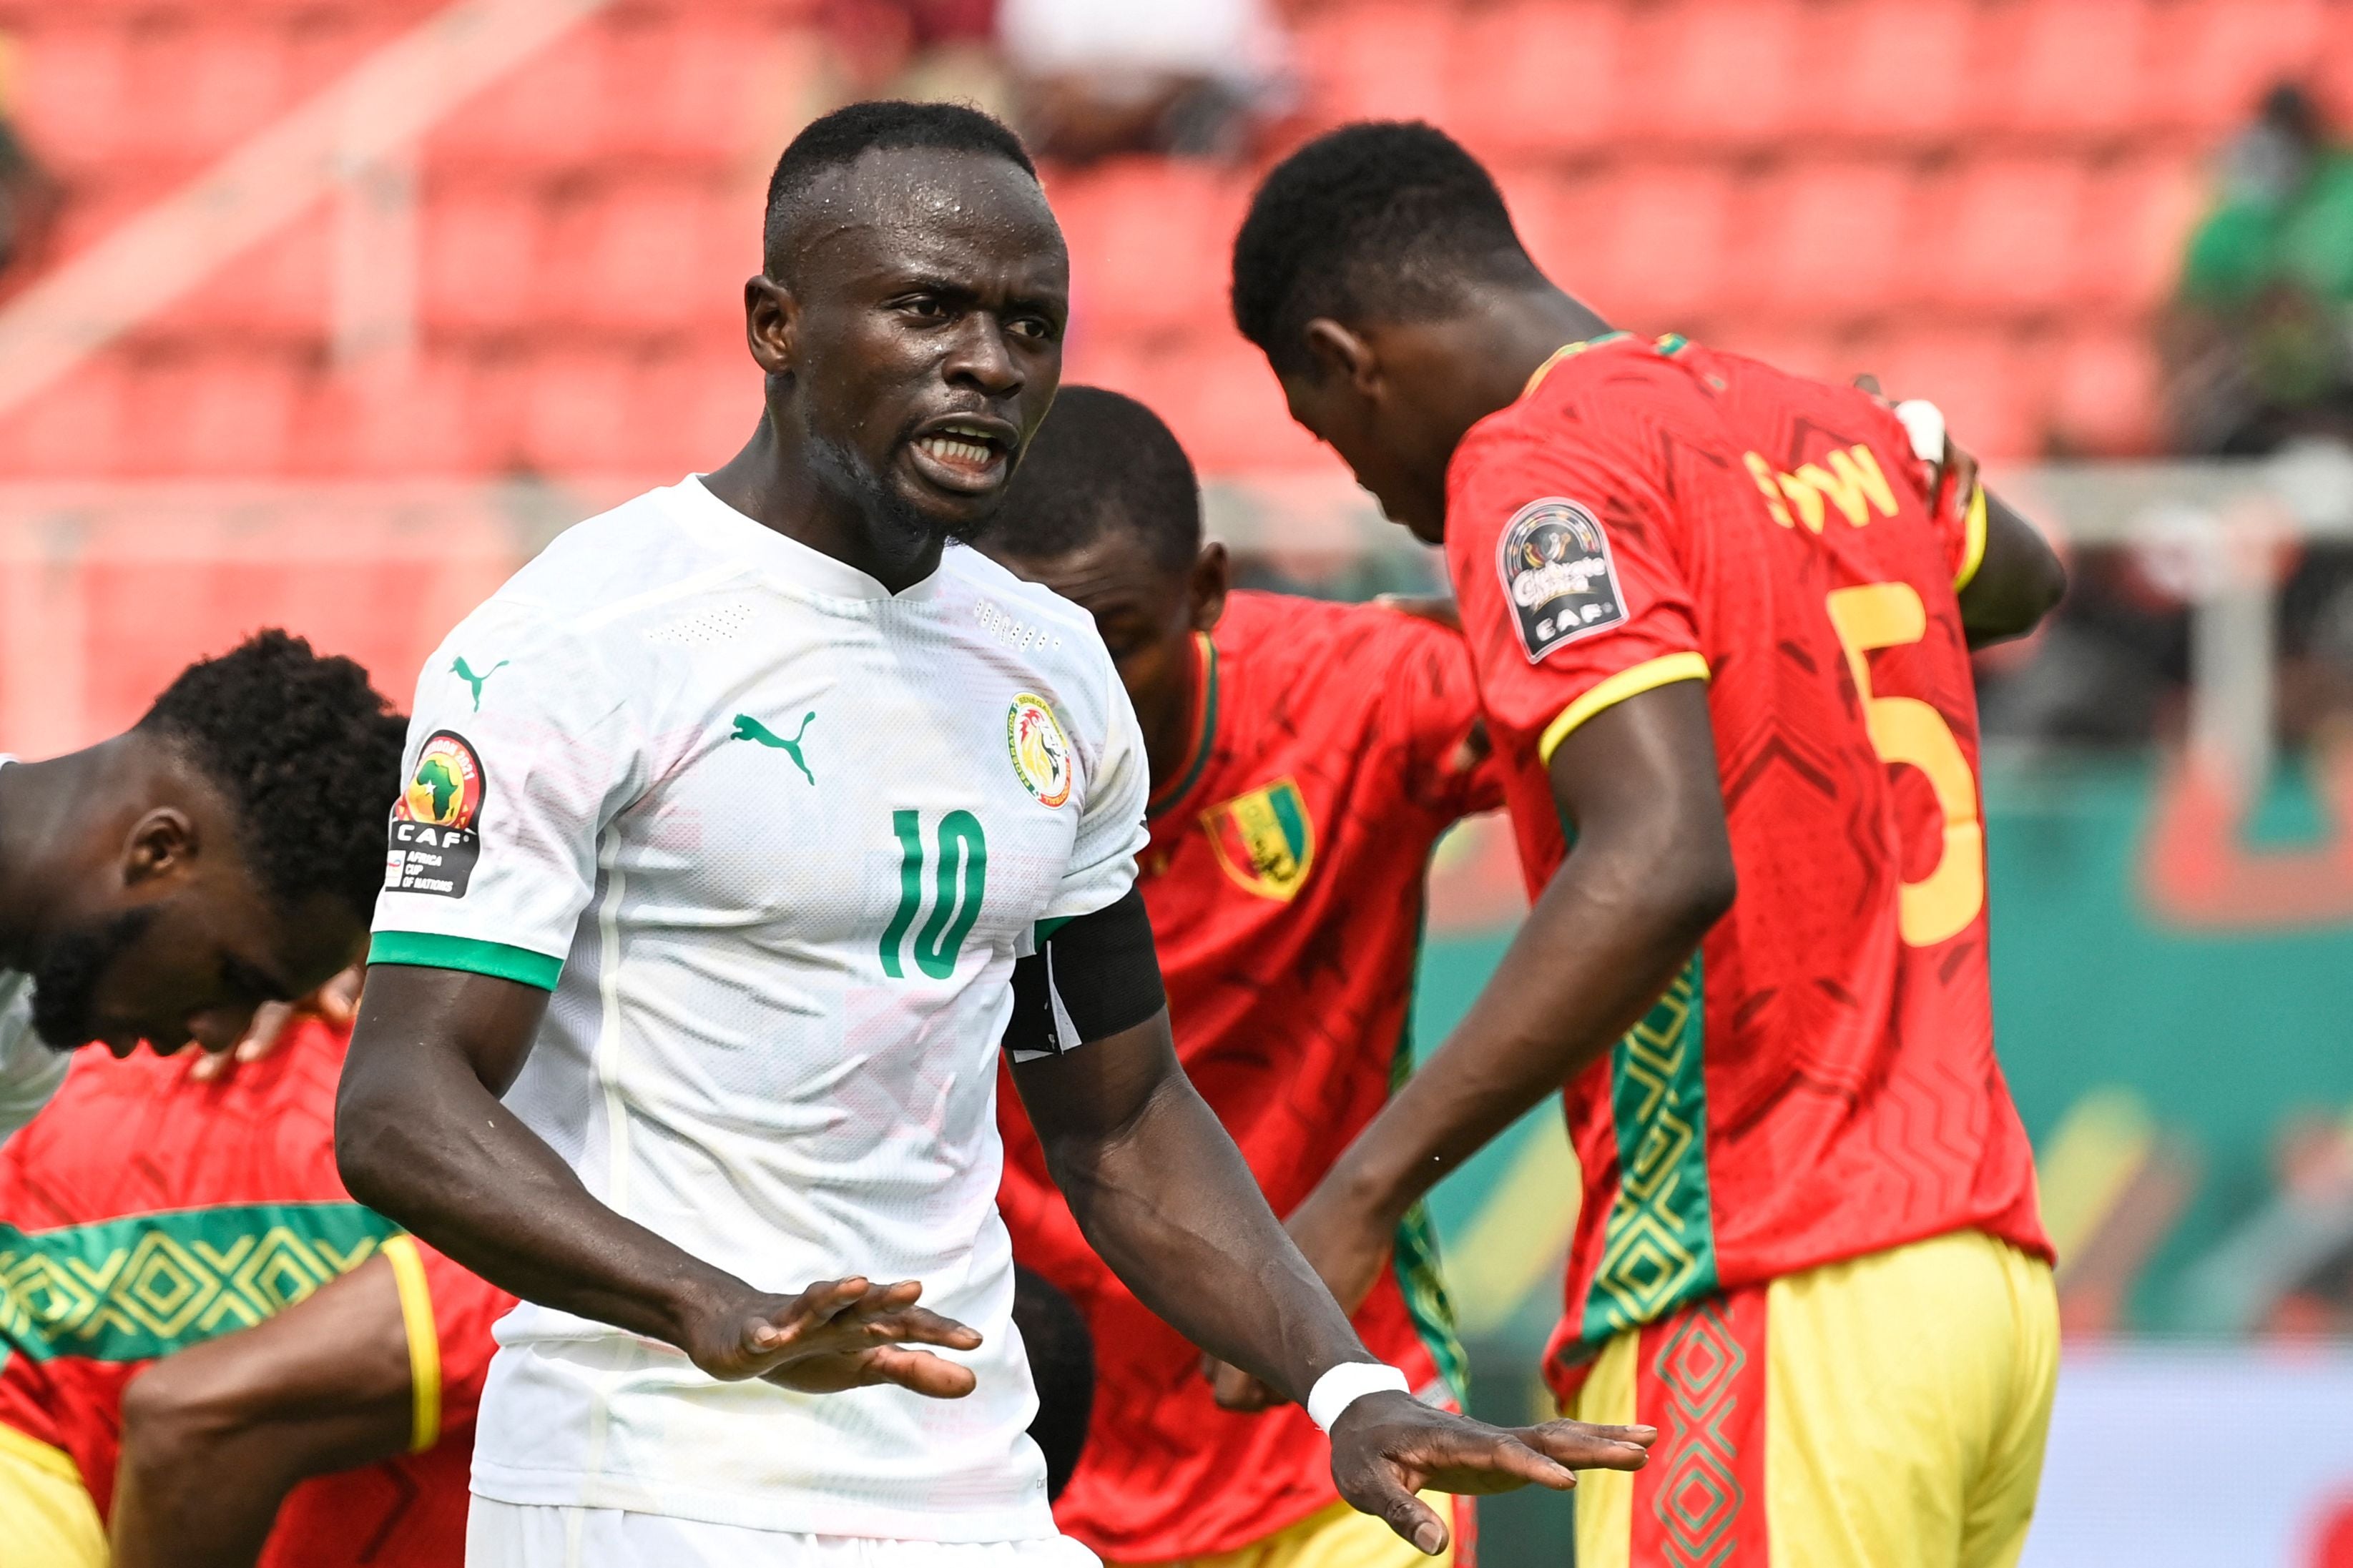 Senegal’s forward Sadio Mane reacts during the Group B Africa Cup of Nations match against Guinea